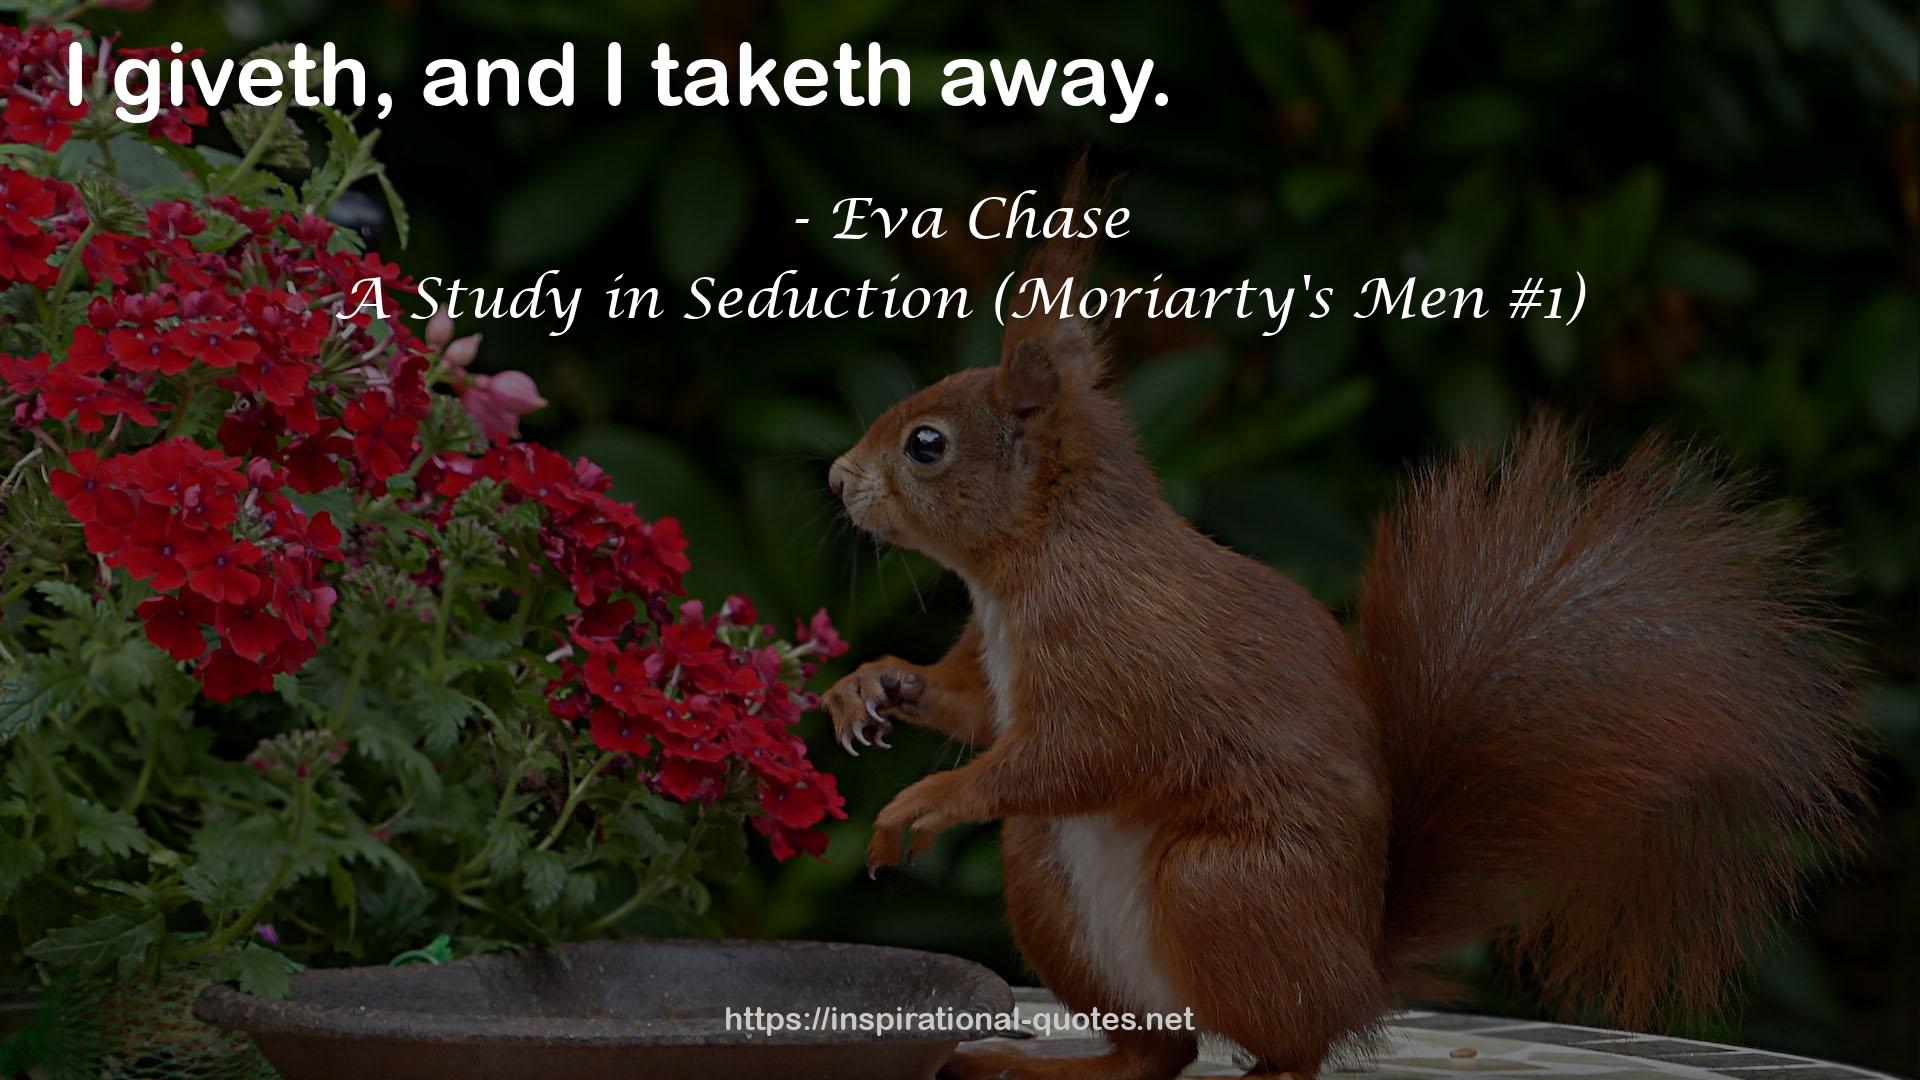 A Study in Seduction (Moriarty's Men #1) QUOTES